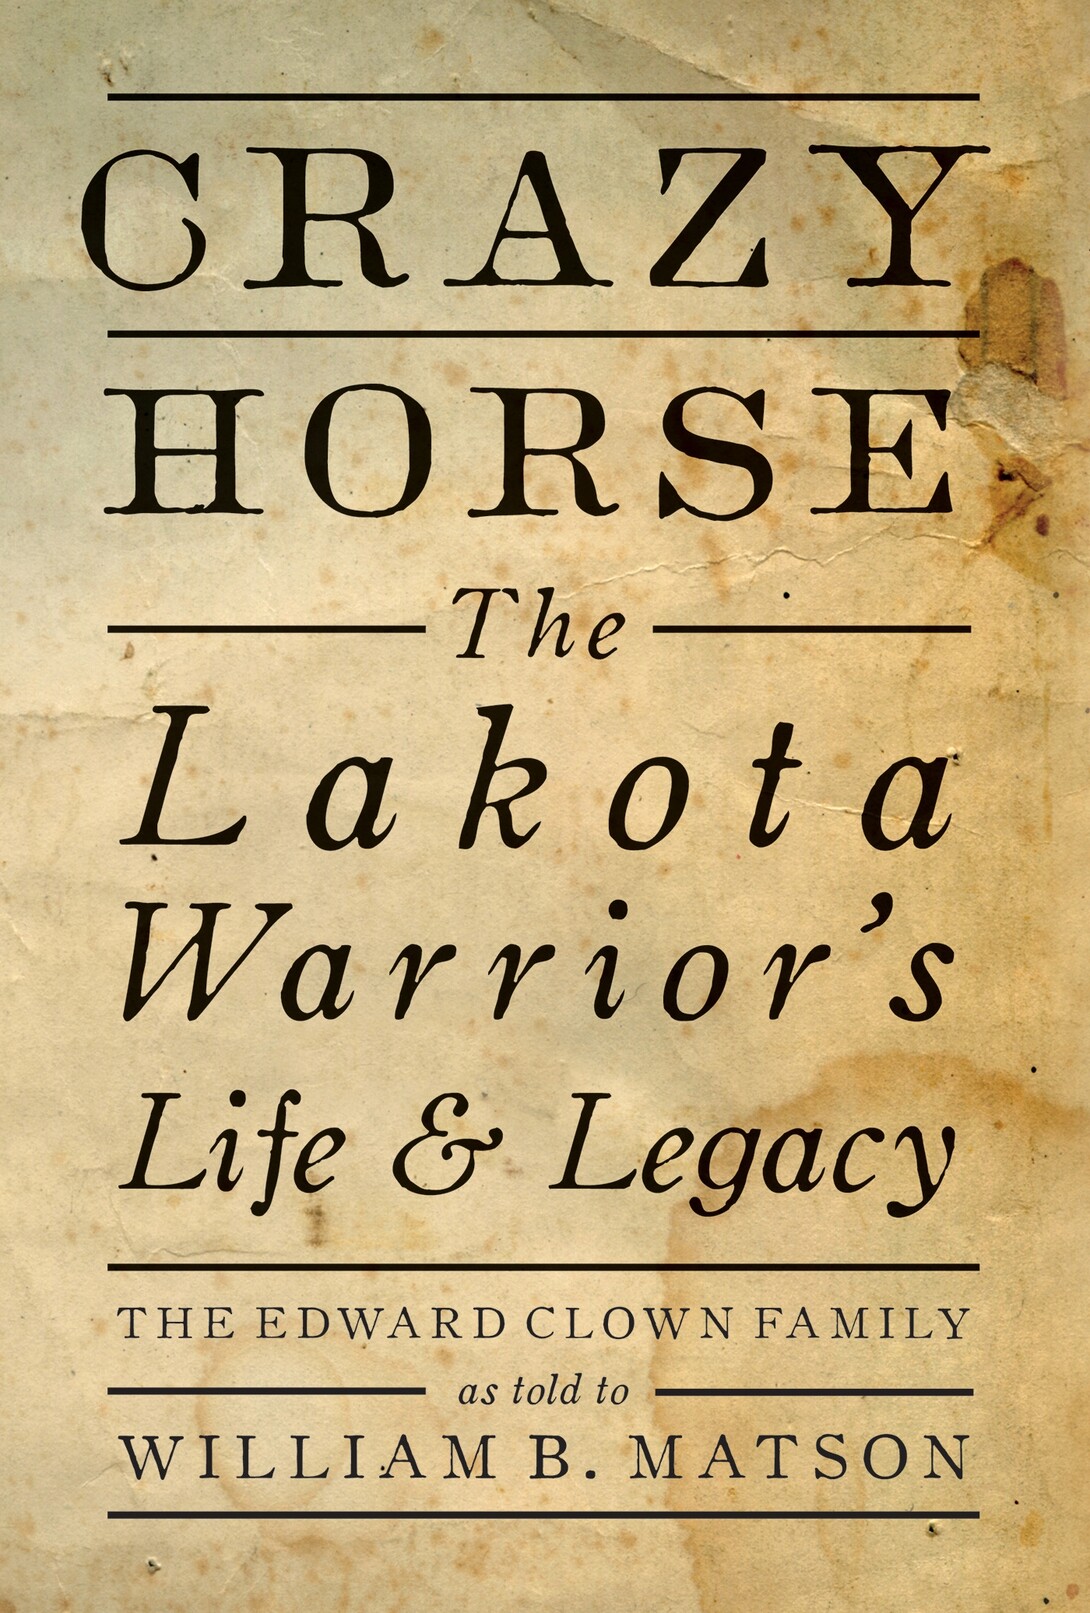 Cover of the new book "Crazy Horse: The Lakota Warrior's Life and Legacy."